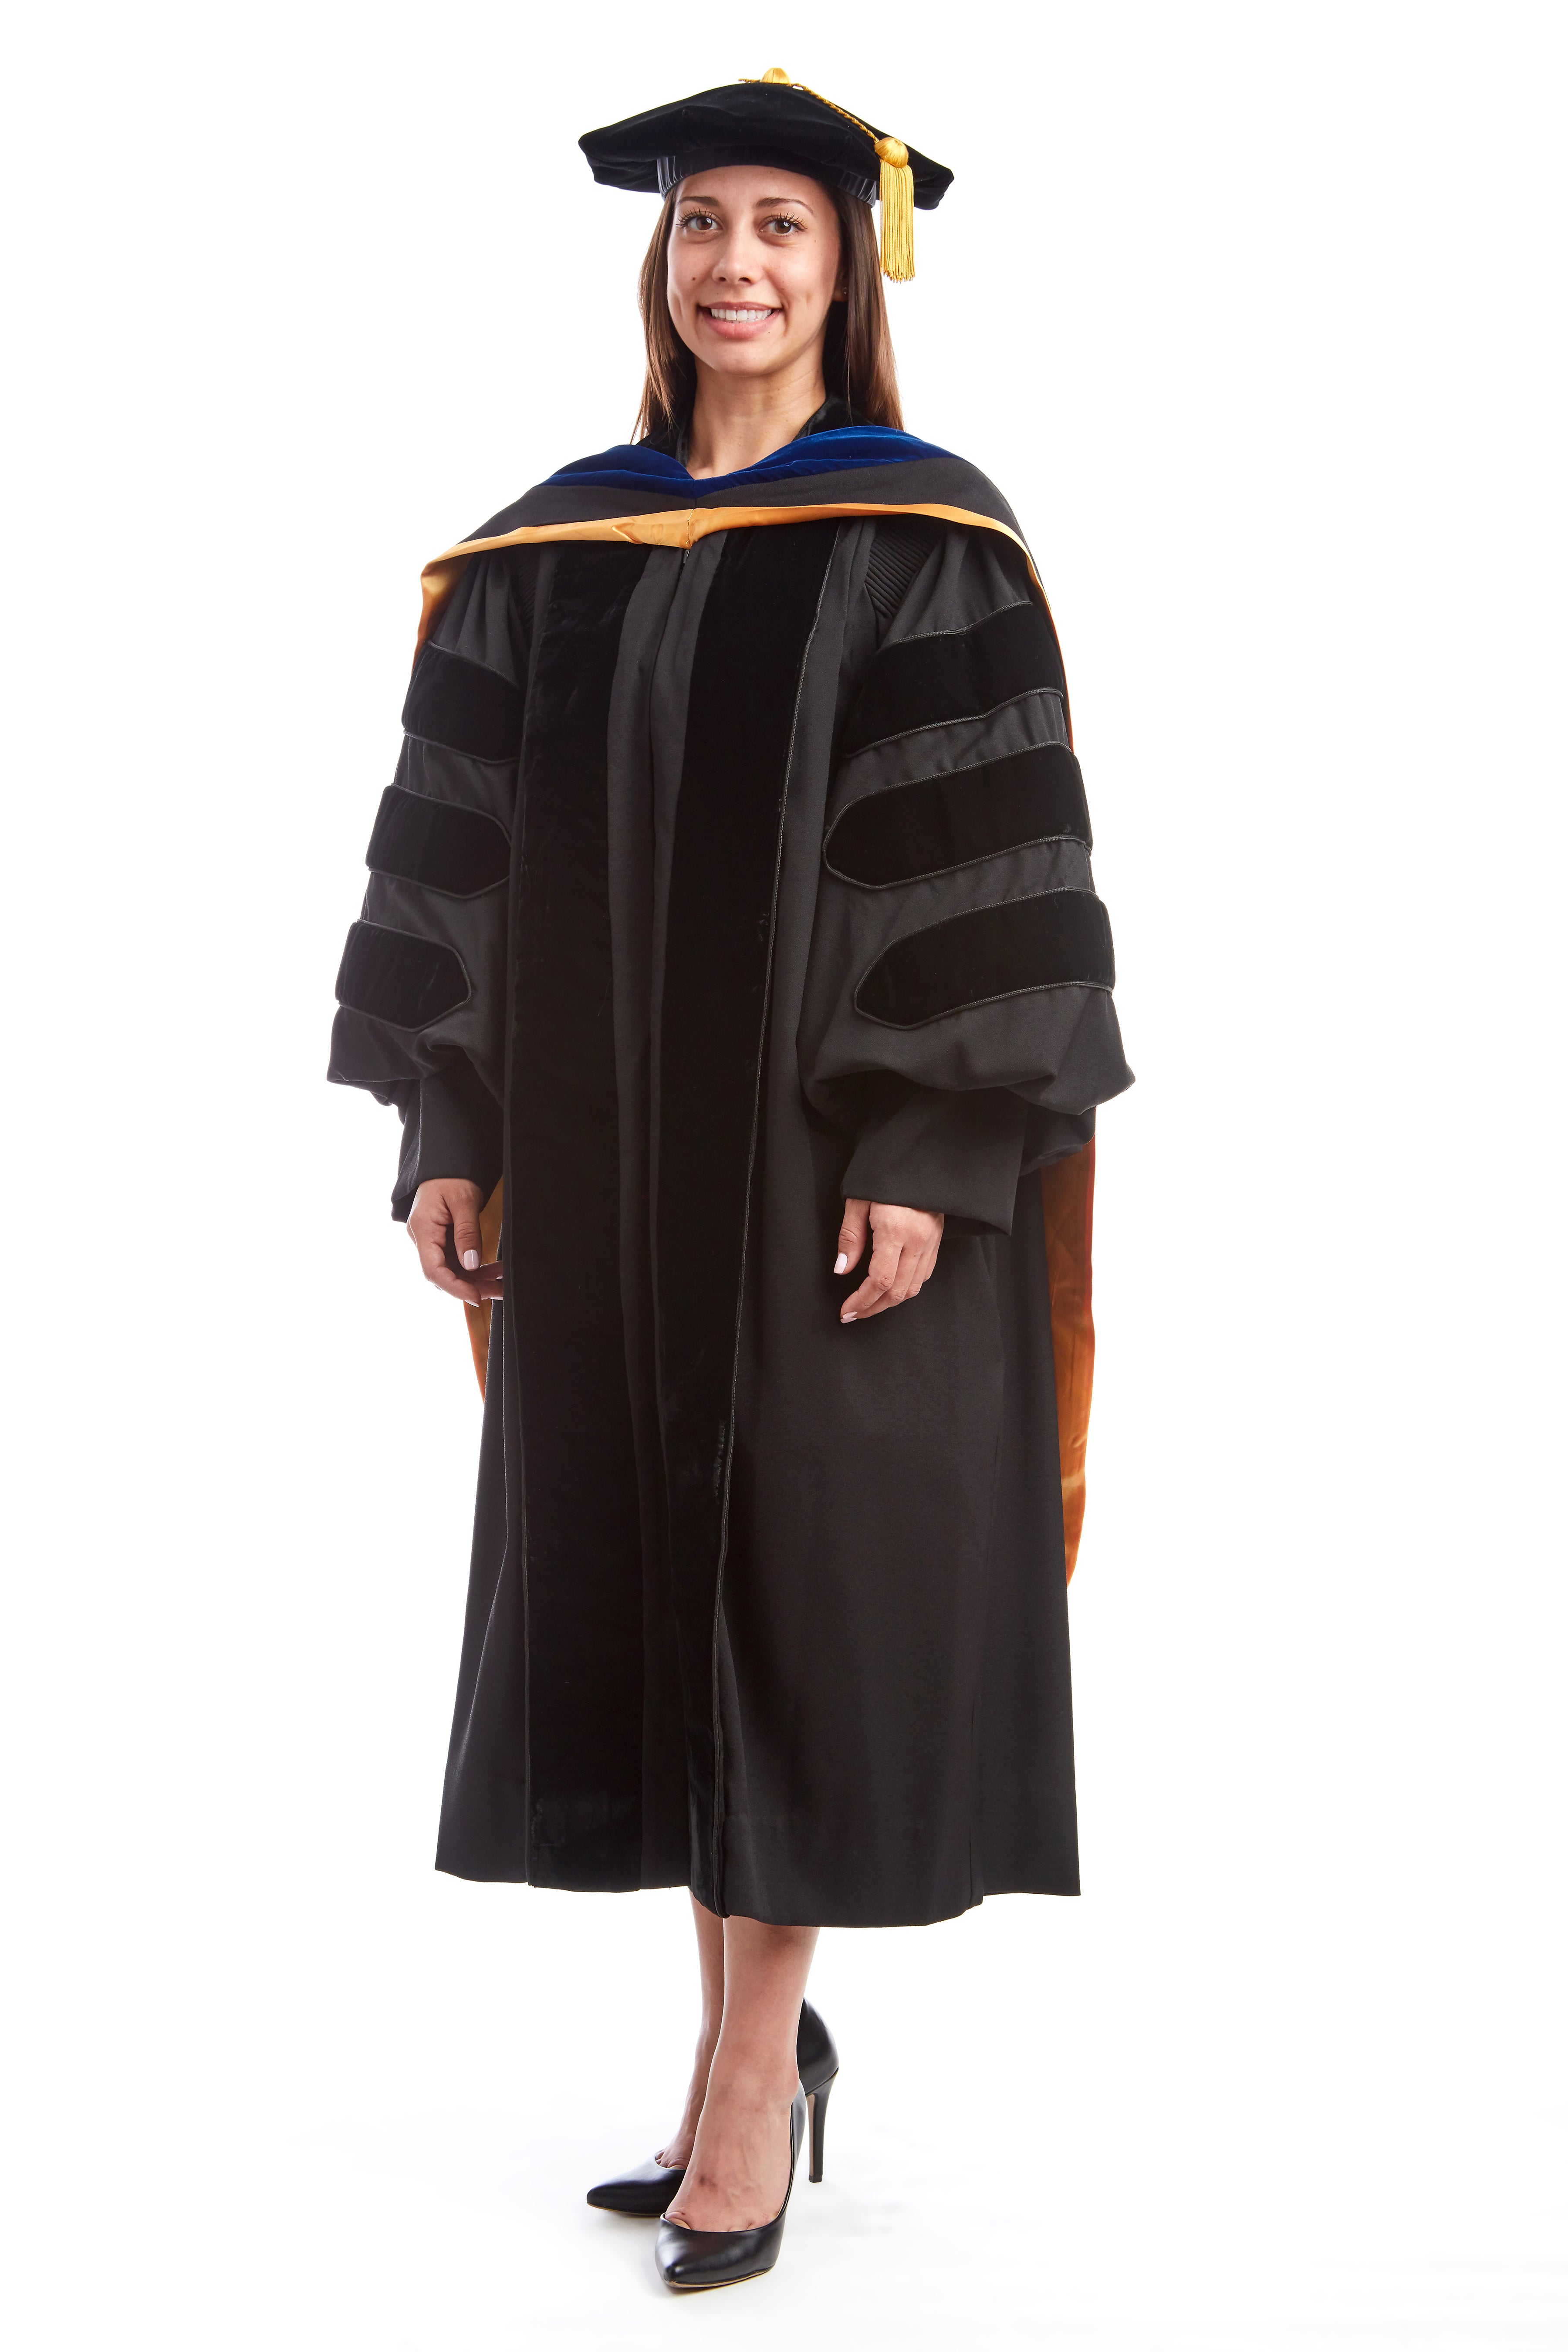 Black Graduation Gown and Cap with Purple and Golden Hood – Mera Convocation